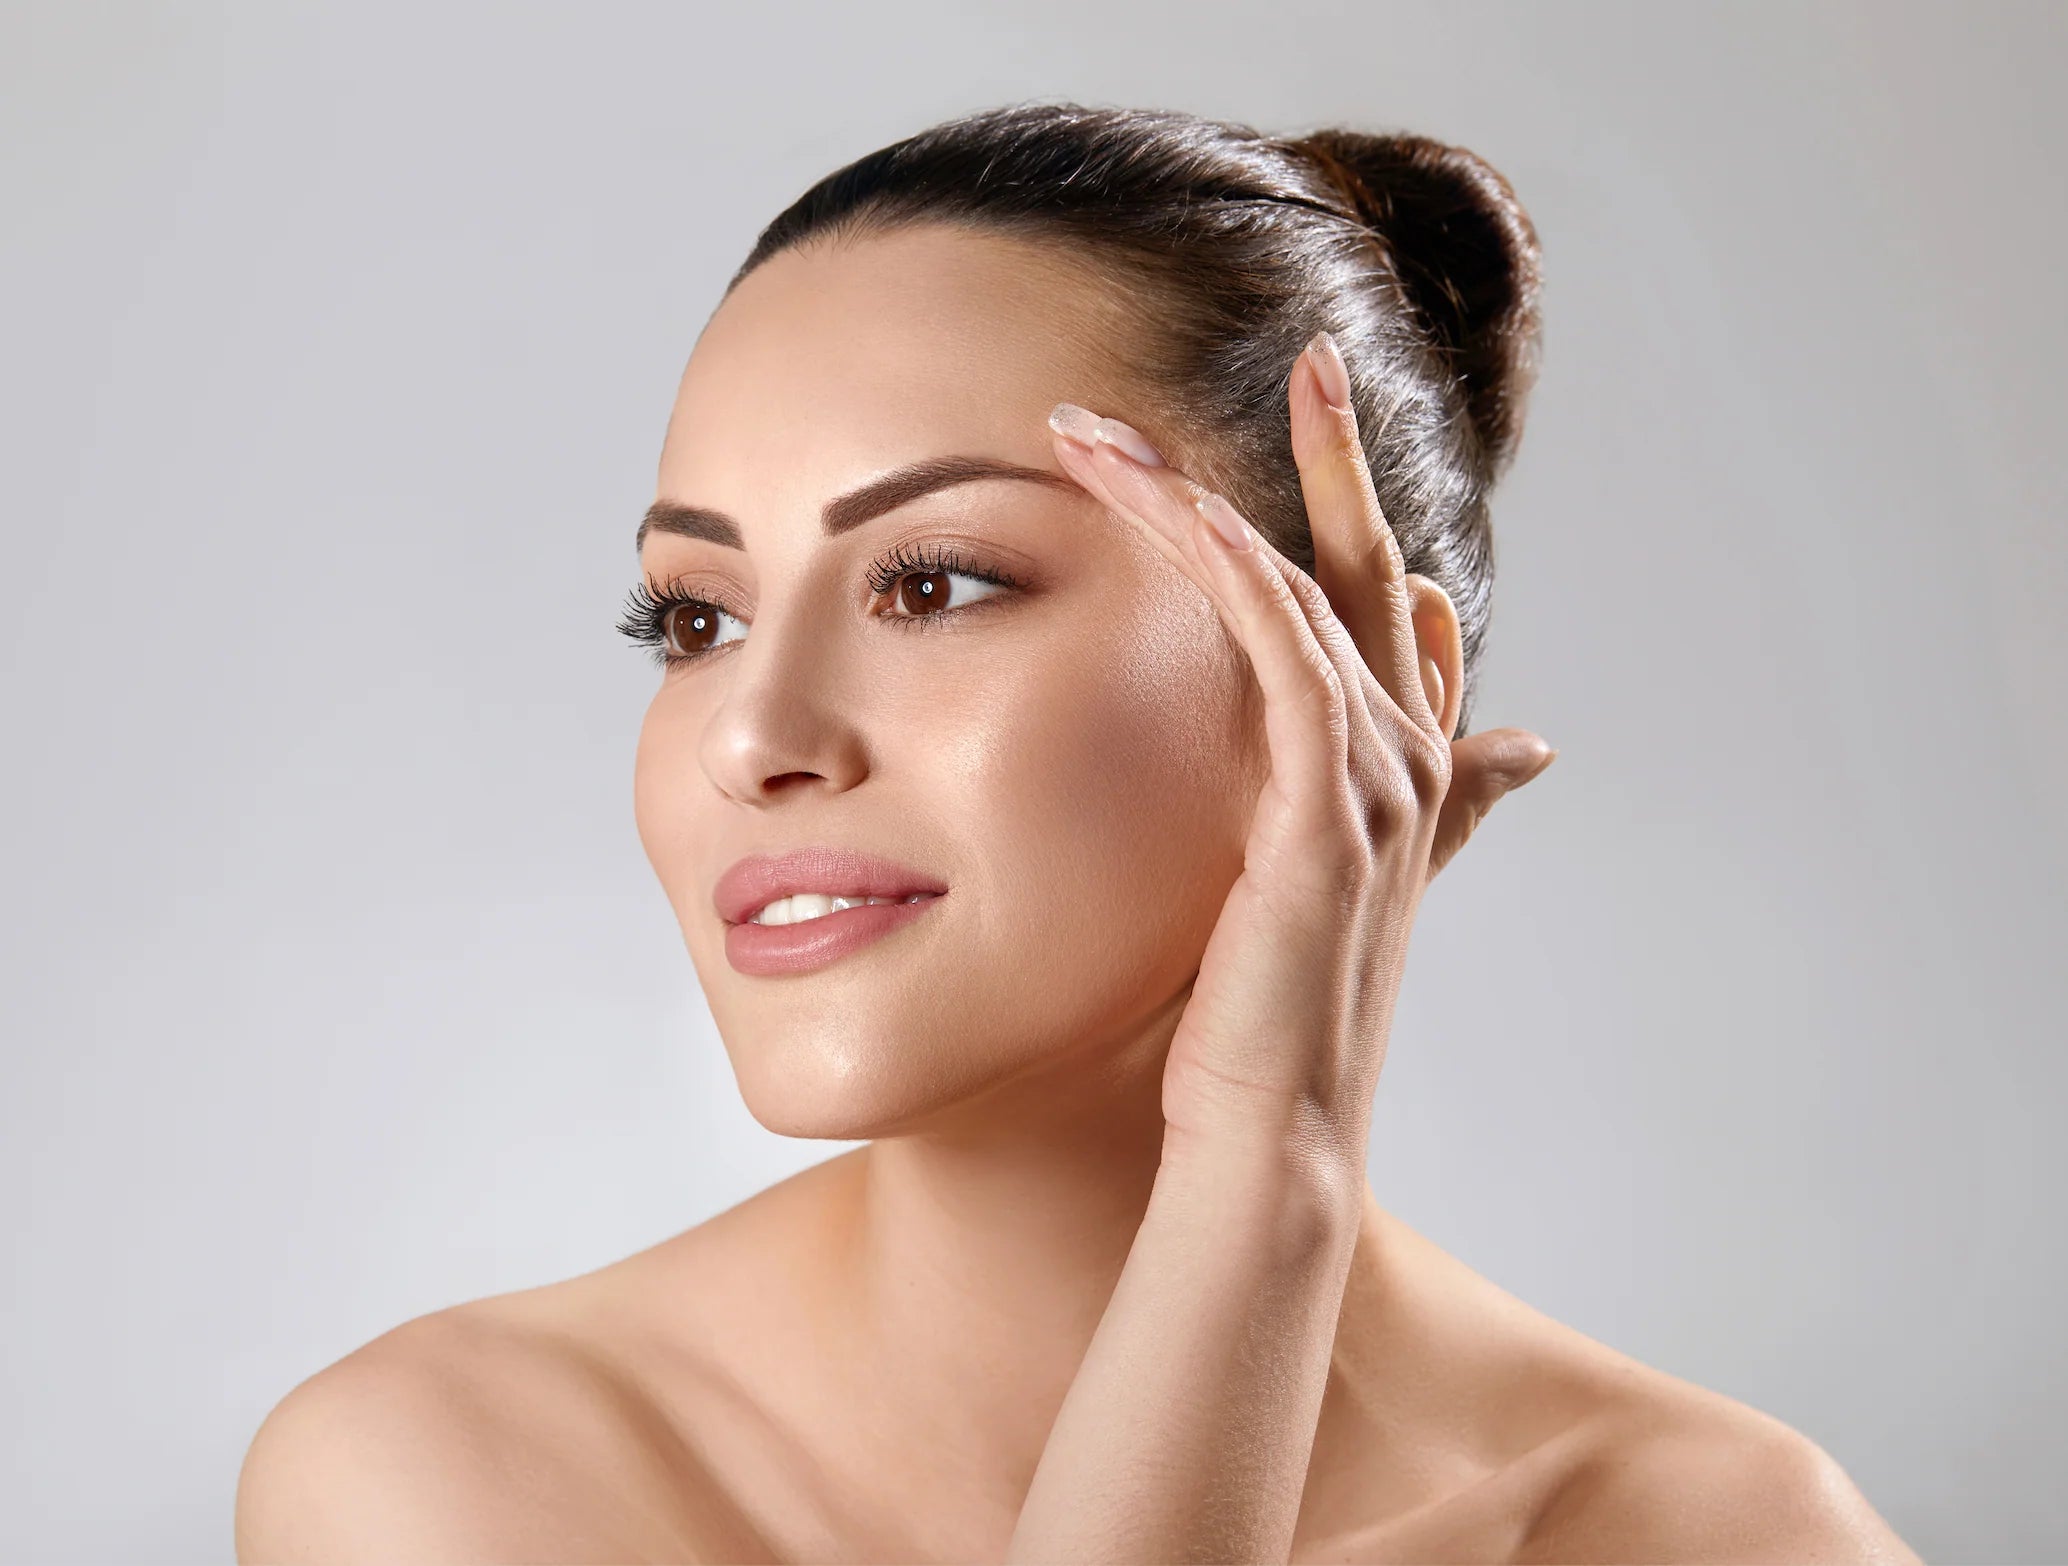 Botox and Fillers Services in Vail Colorado